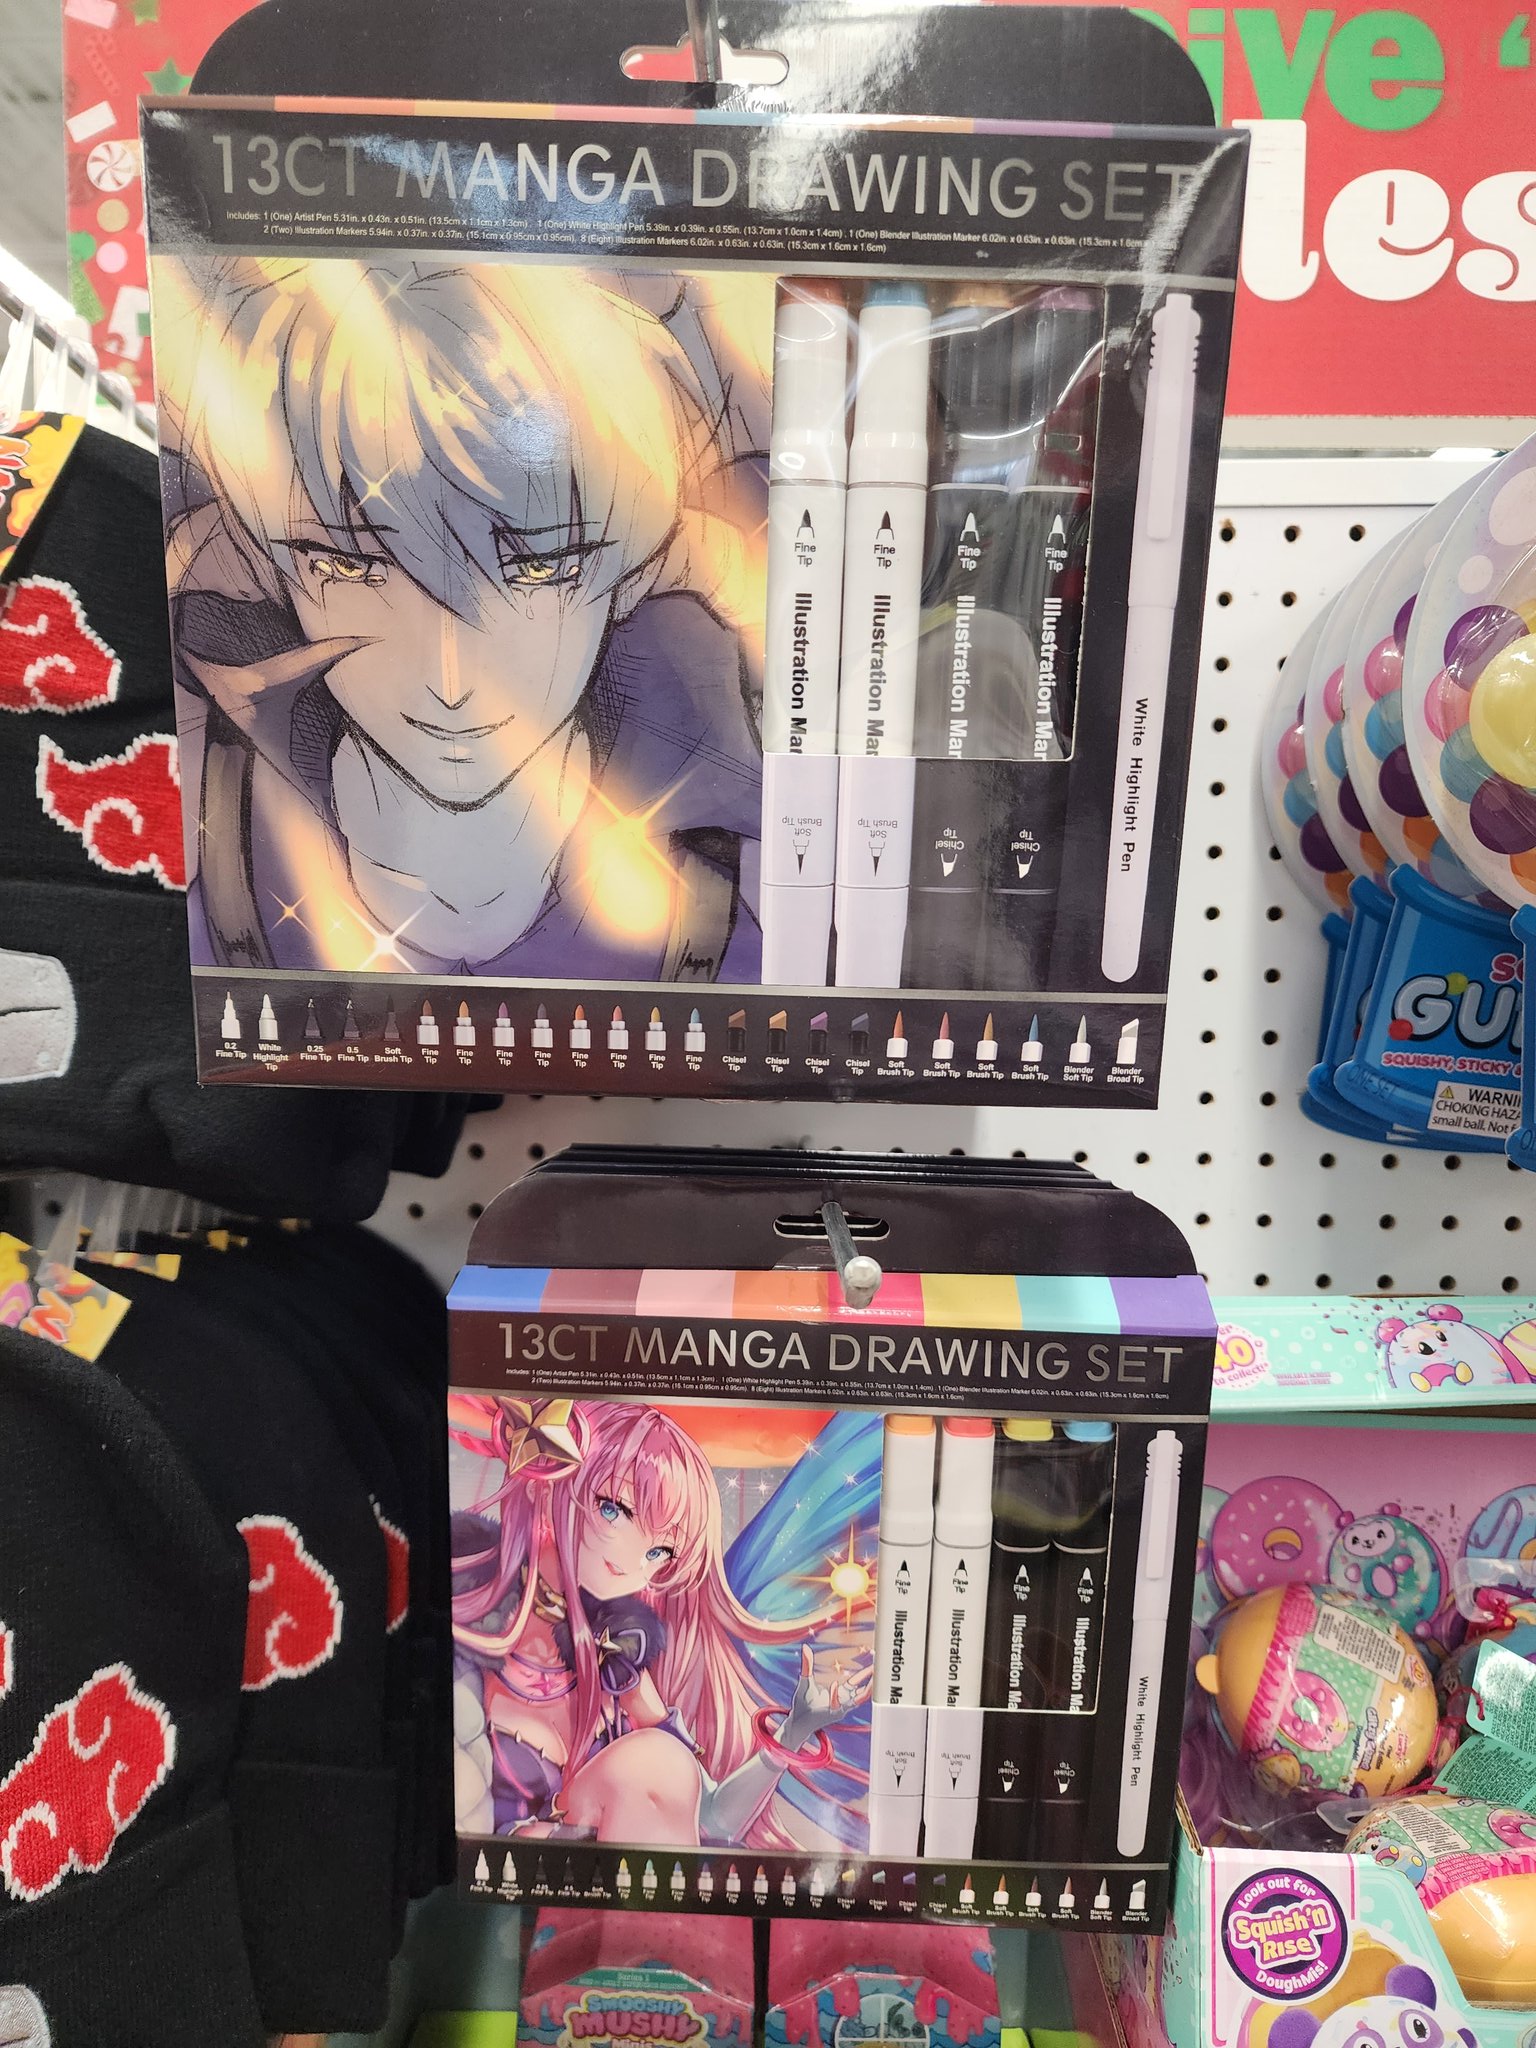 5below Manga Drawing Set - Is it Worth it? Artist PRODUCT REVIEW